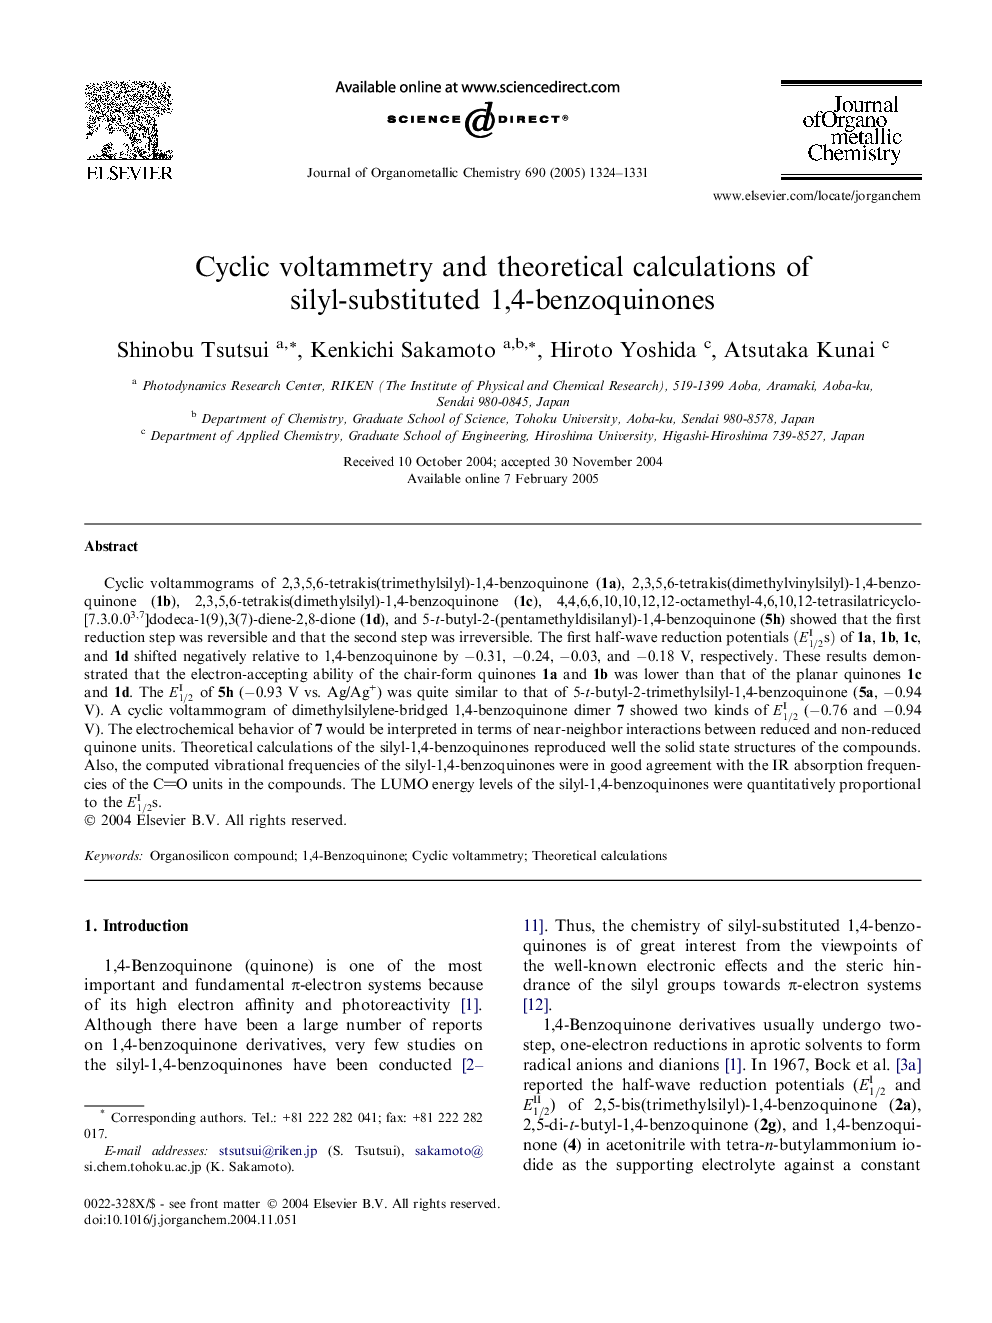 Cyclic voltammetry and theoretical calculations of silyl-substituted 1,4-benzoquinones